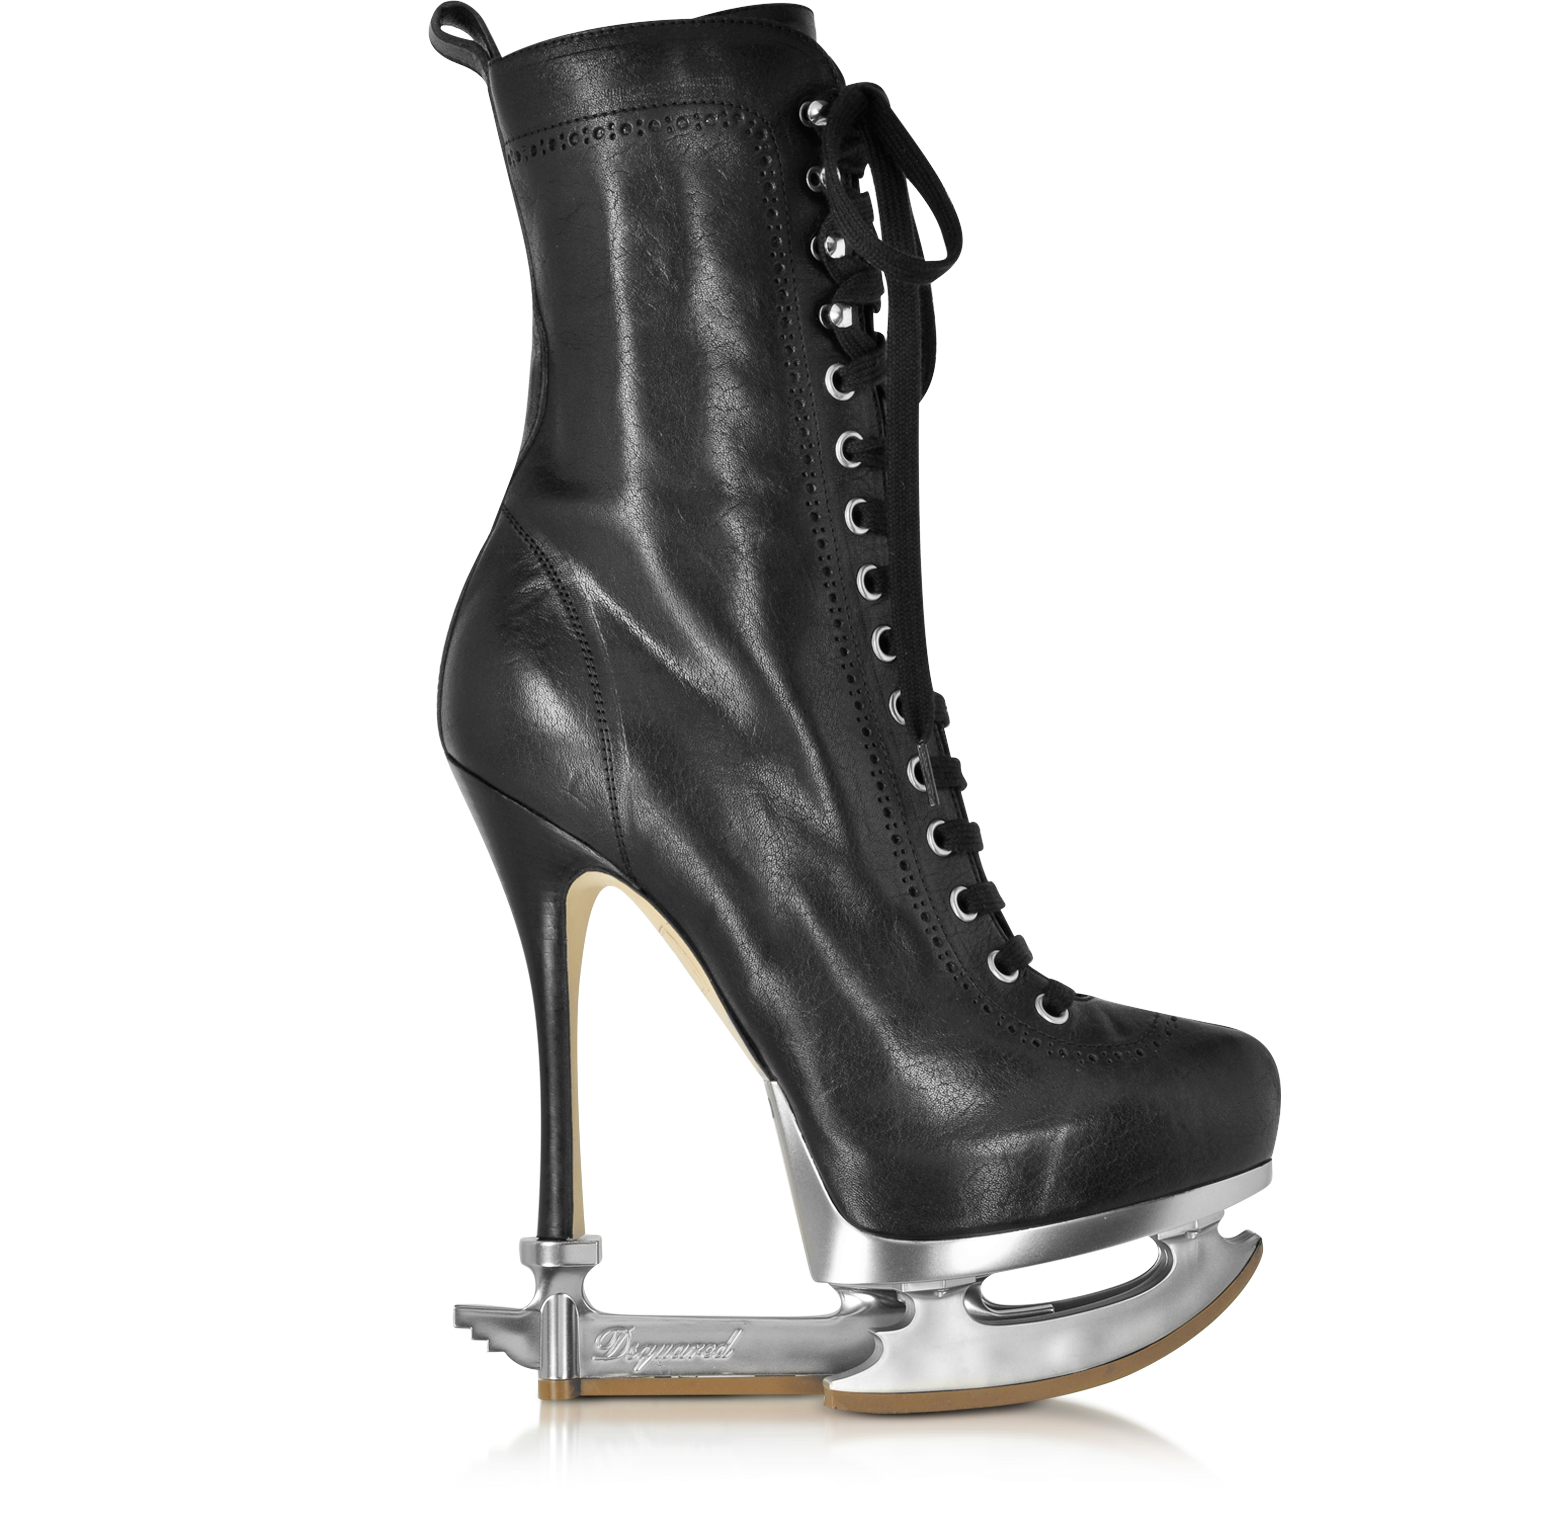 DSquared2 Ice Skate Black Leather Ankle Boot 38 IT/EU at FORZIERI